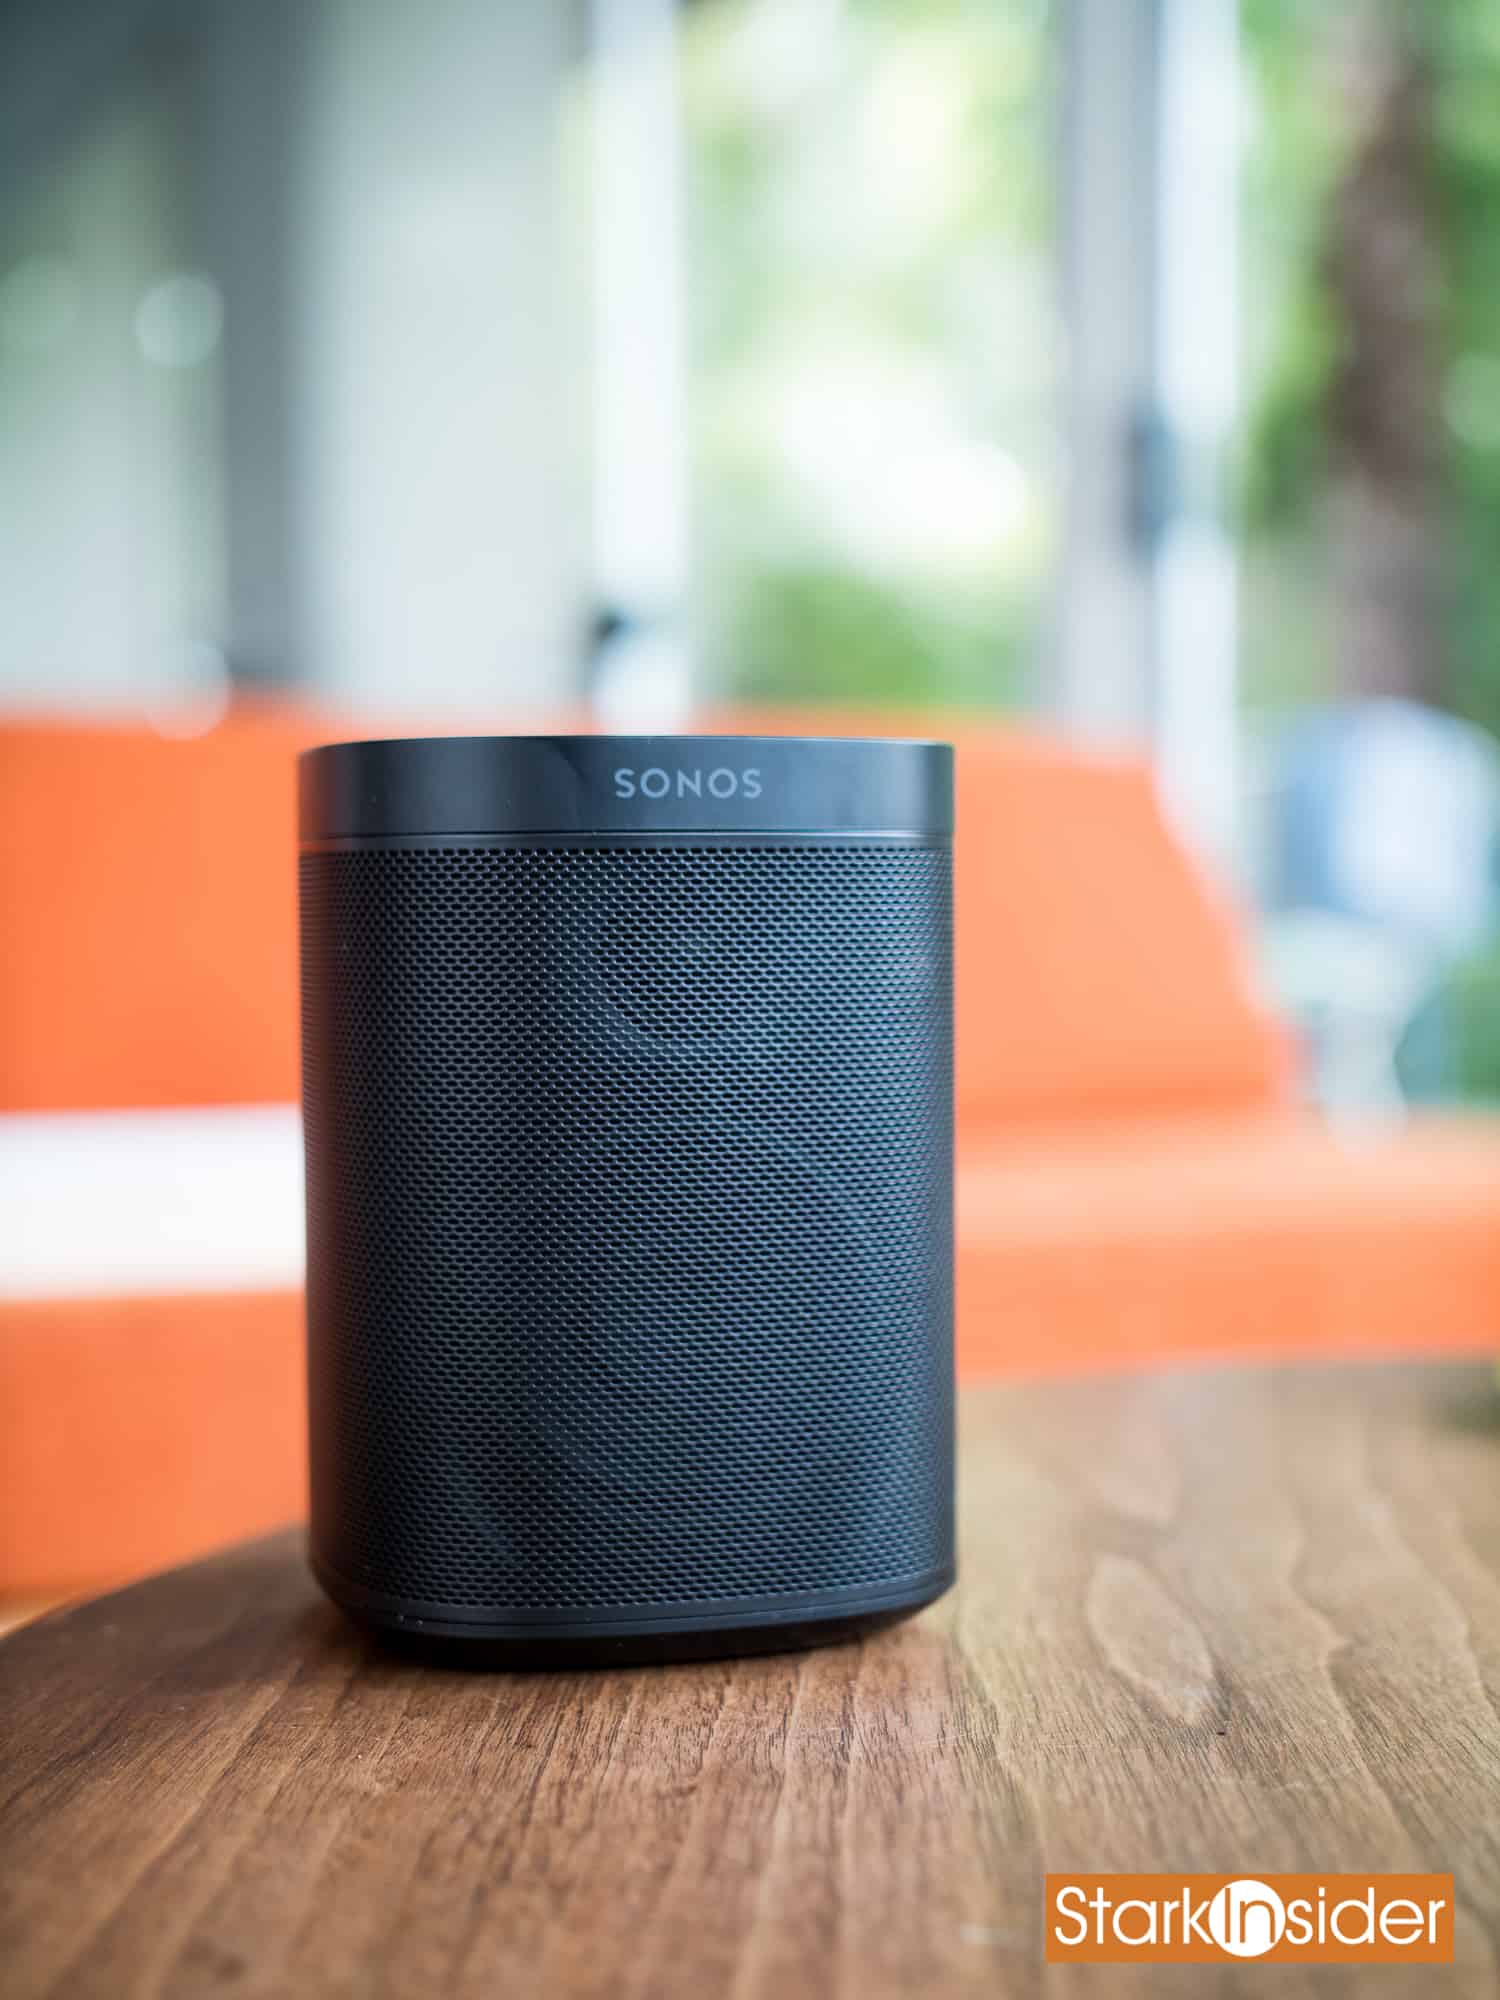 Tragisk sejle angre In Tech: Sonos speakers can now stream Spotify Free | Stark Insider